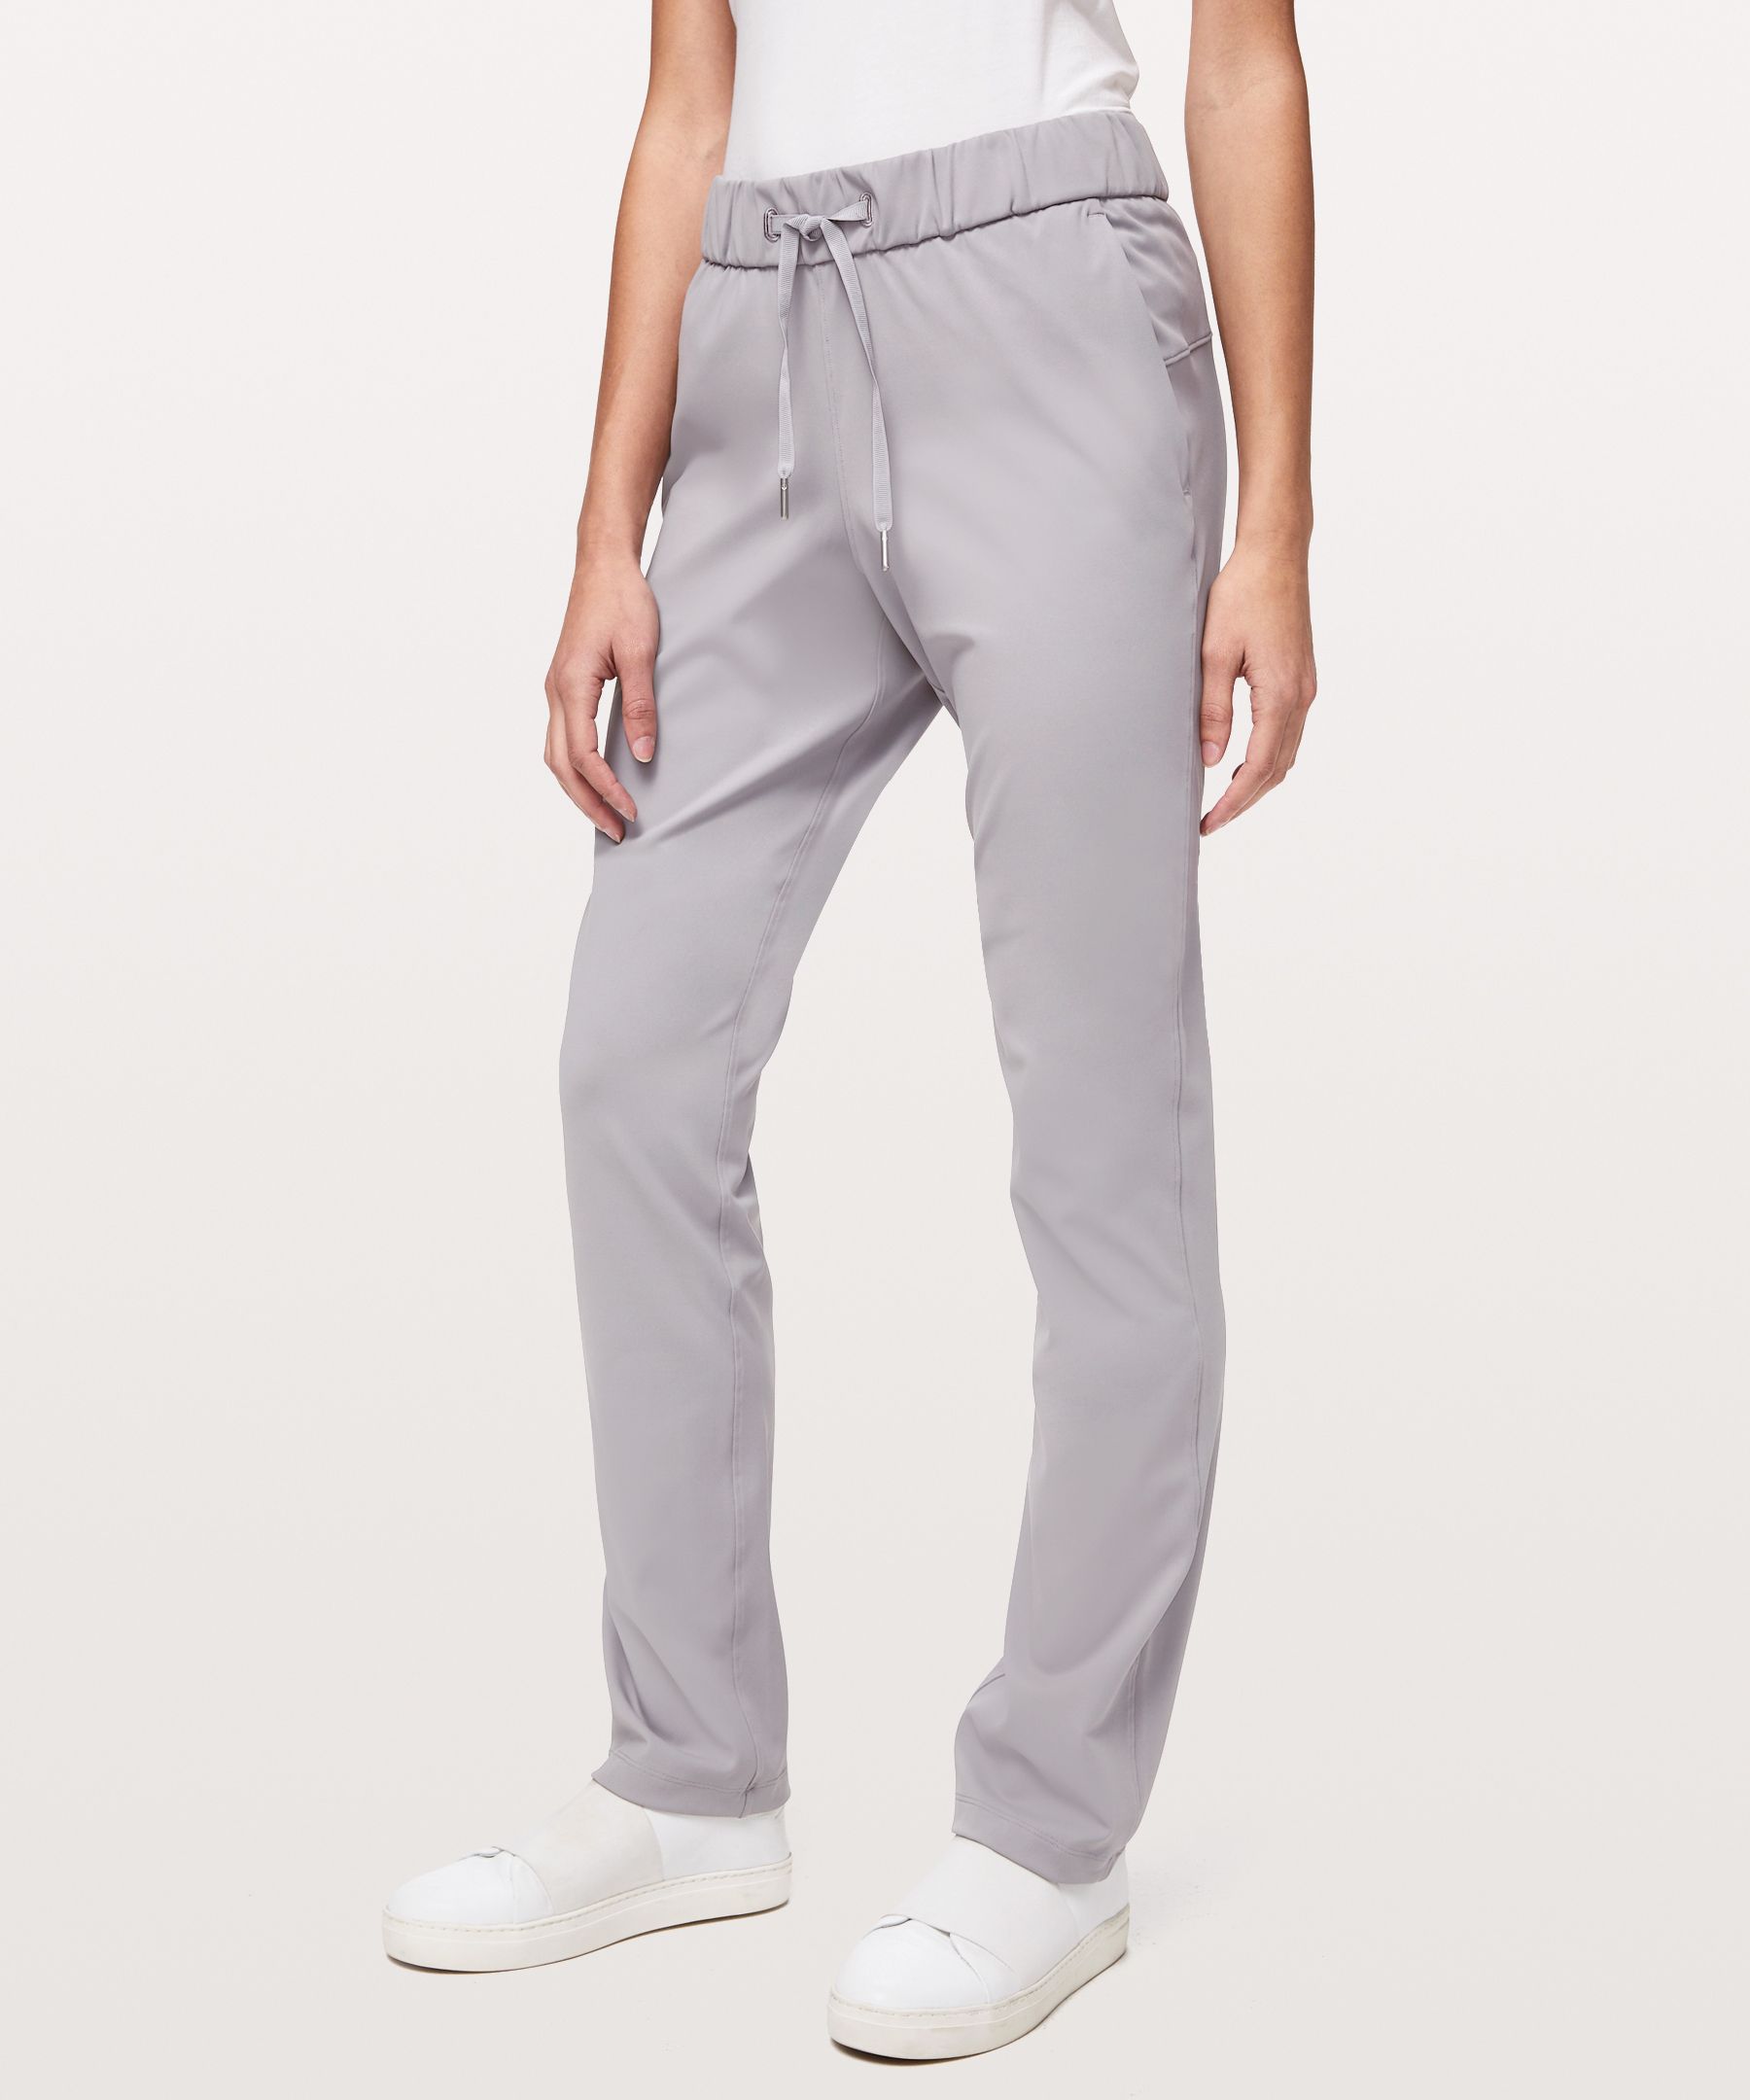 Lululemon On The Fly Pant Tall 33 *online Only In Silverscreen